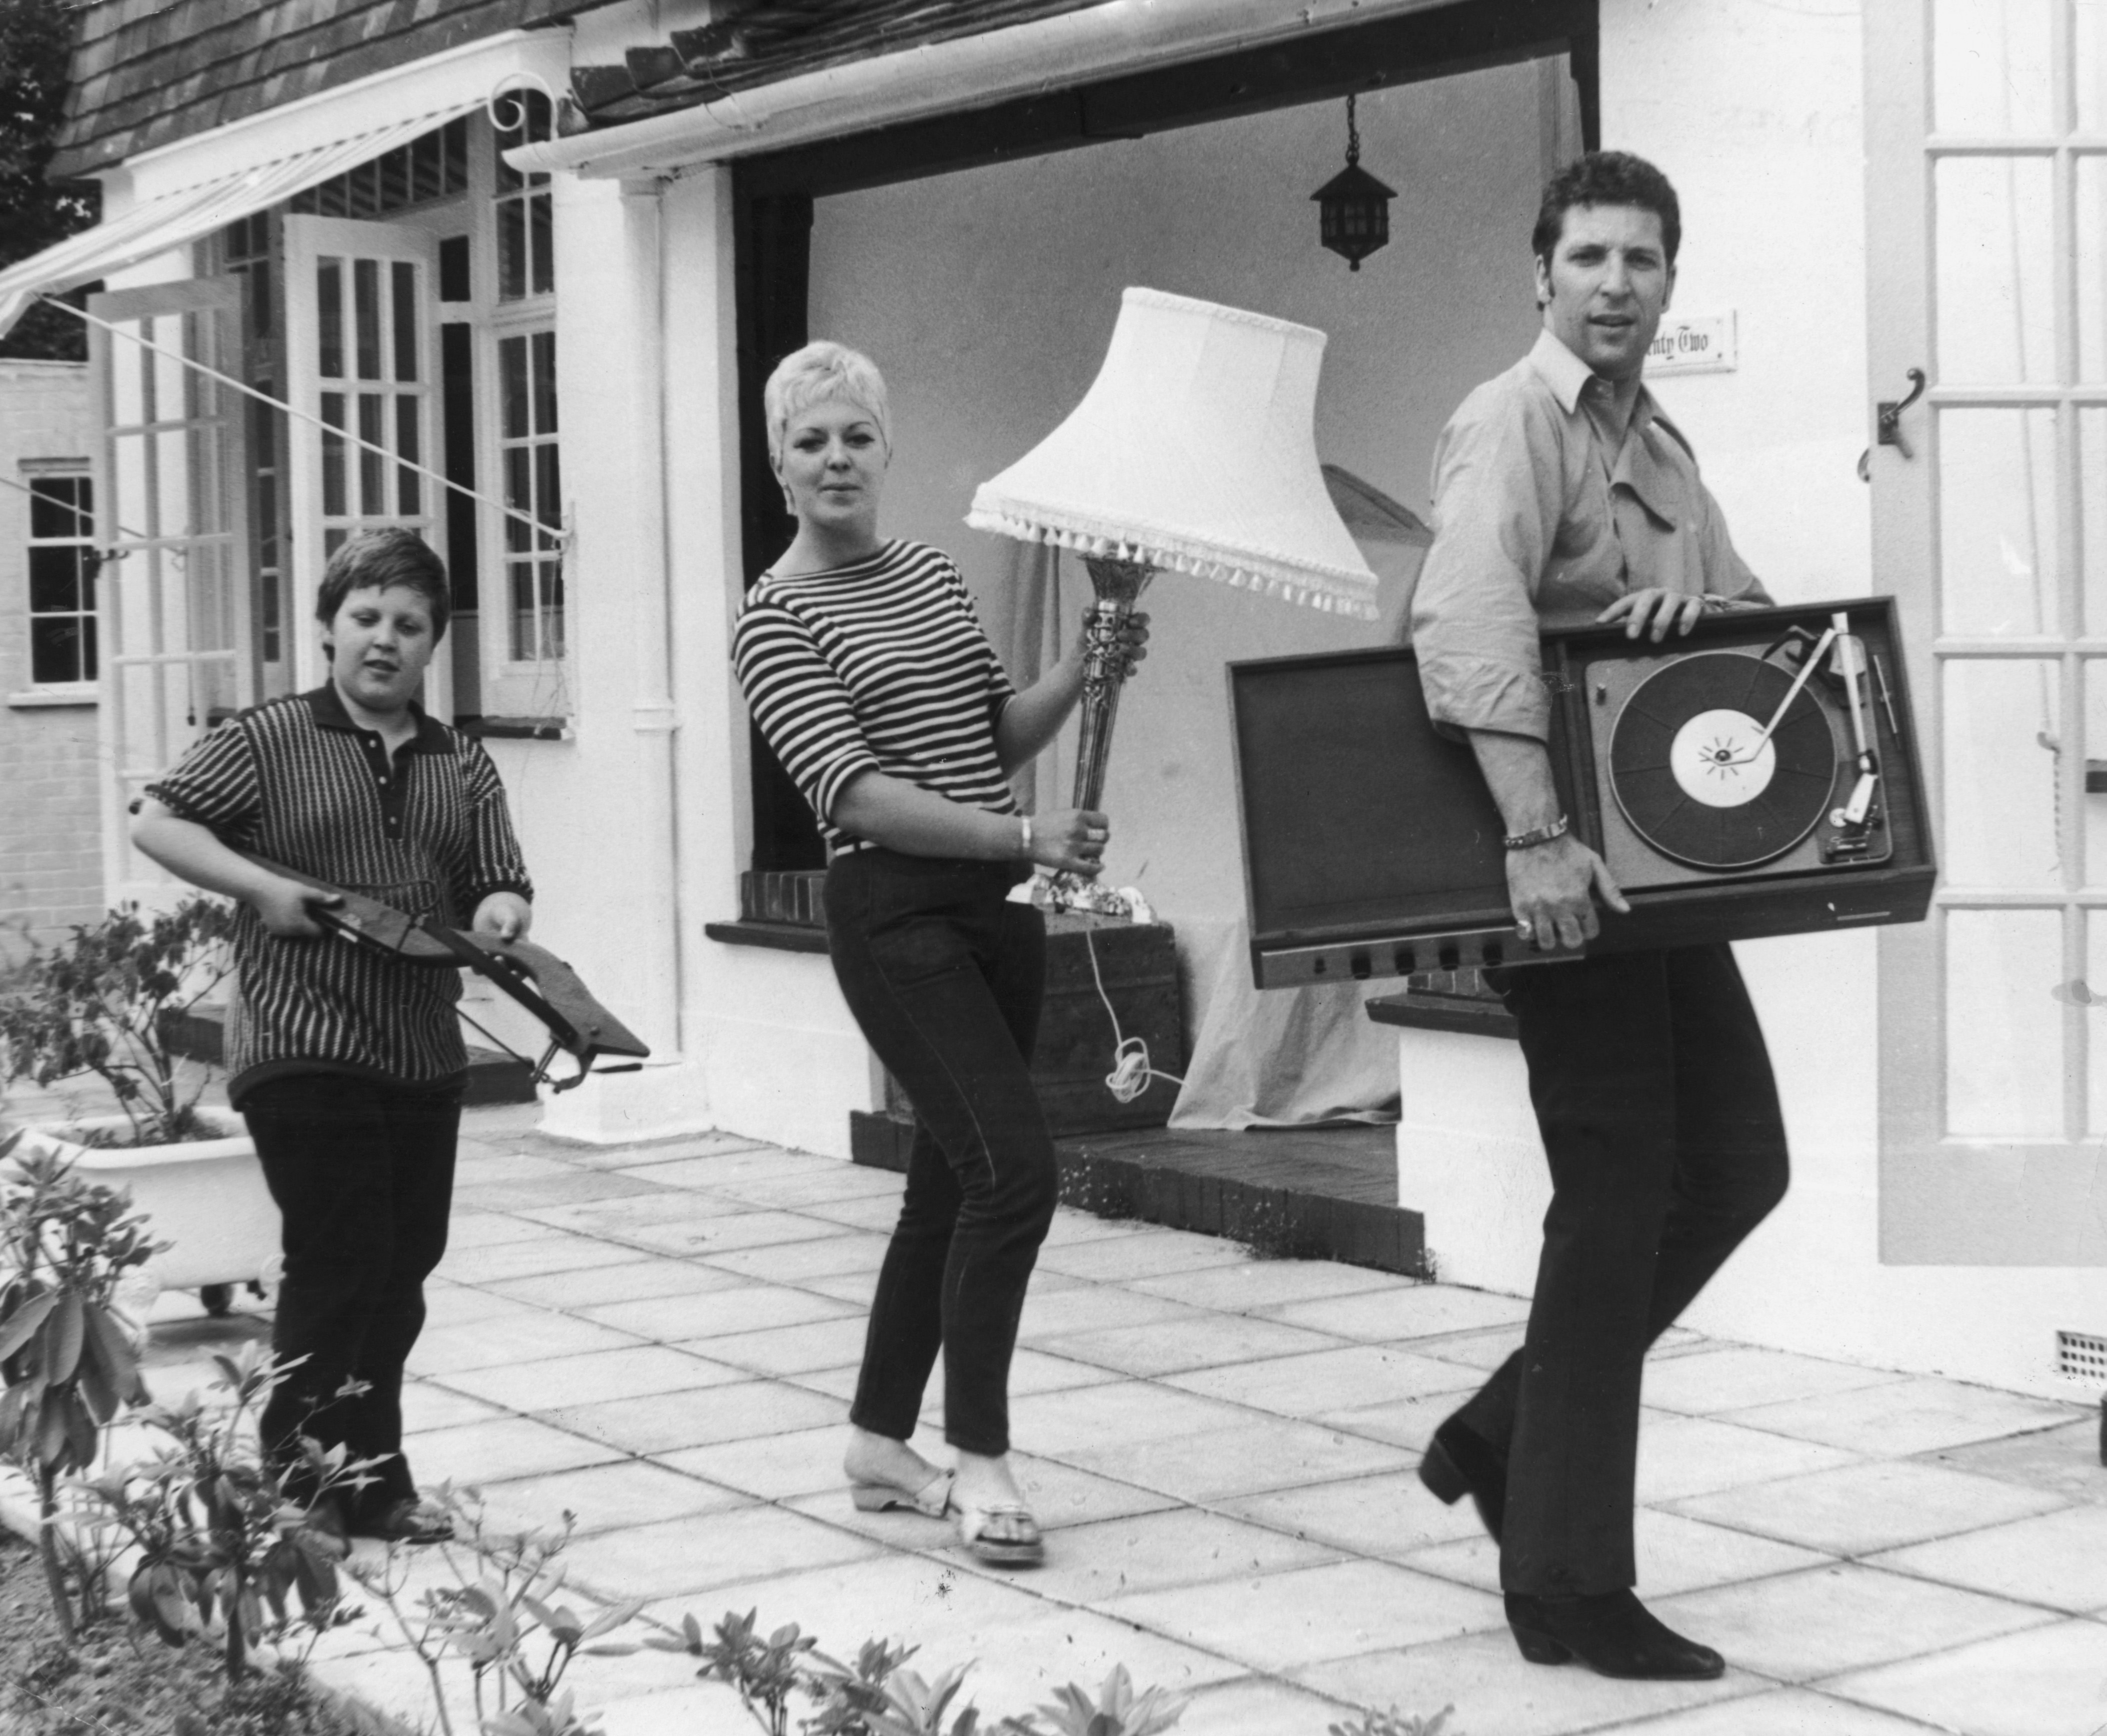 Tom Jones and his family, wife Melinda "Linda" Woodward and son Mark Woodward, moving into their new home Sunbury in Surrey on July 12, 1967 | Source: Getty Images